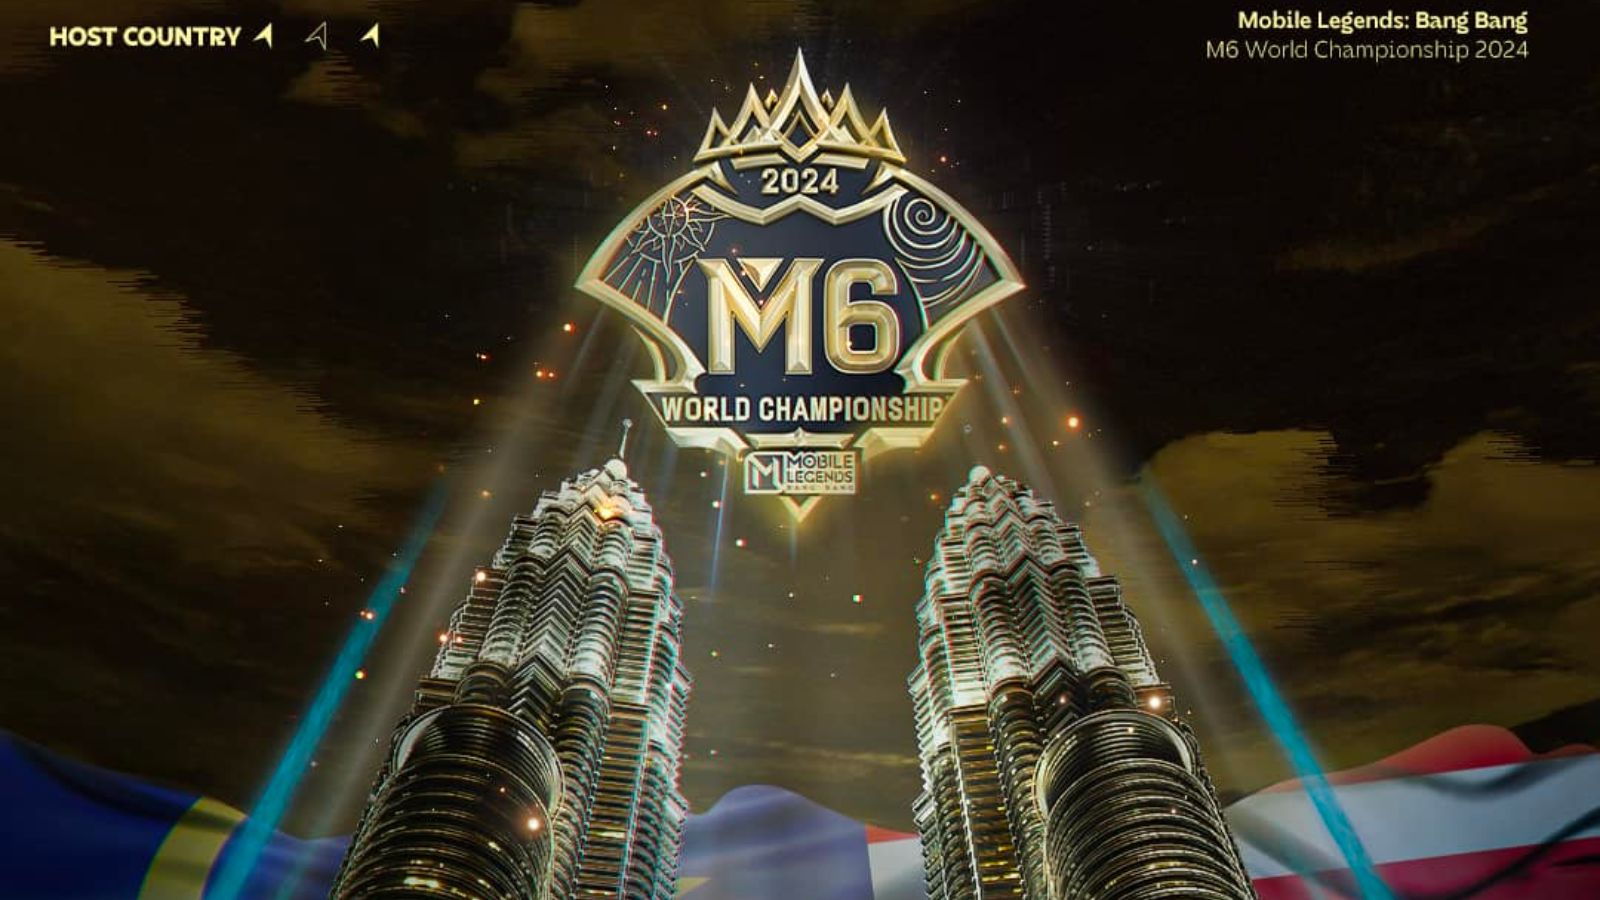 Mobile Legends: M6 World Championship Returns to Malaysia